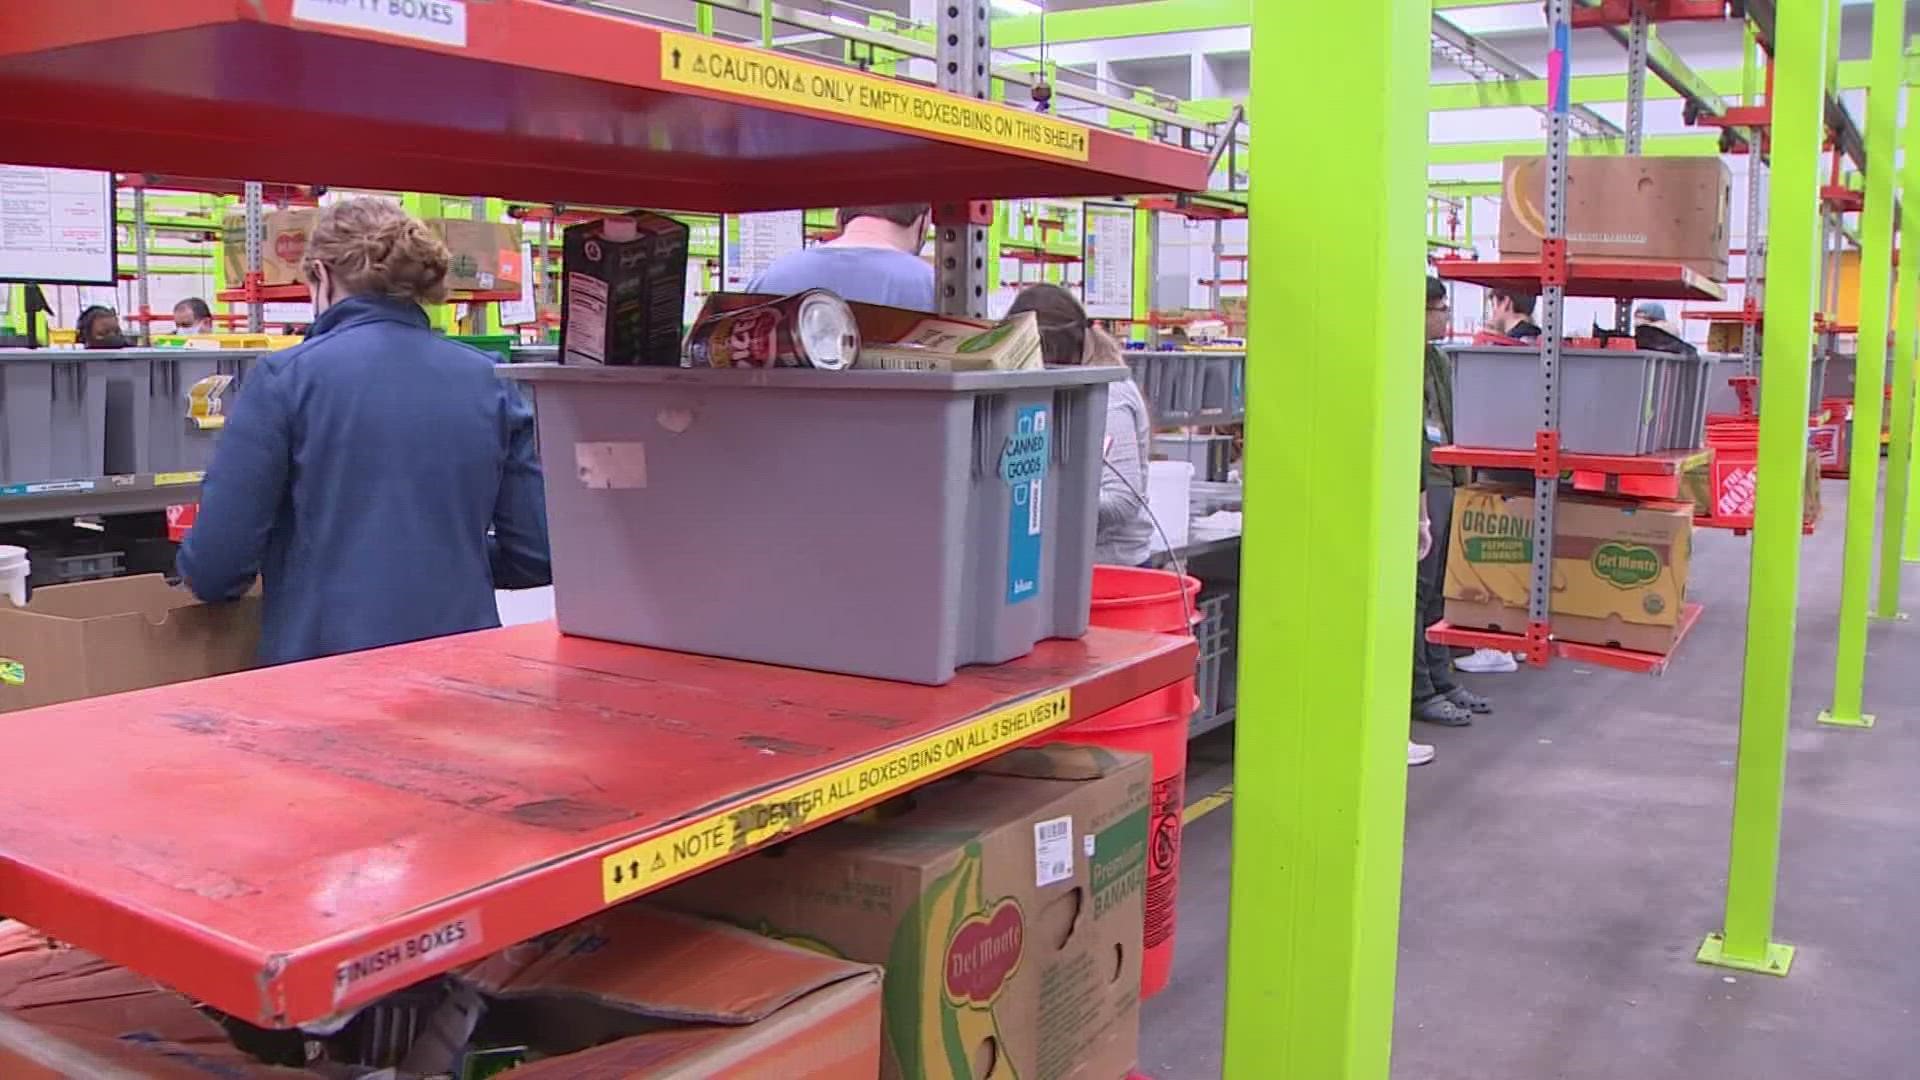 Food insecurity often means having to make tough choices when it comes to paying bills. Here is how the Houston Food Bank is helping.